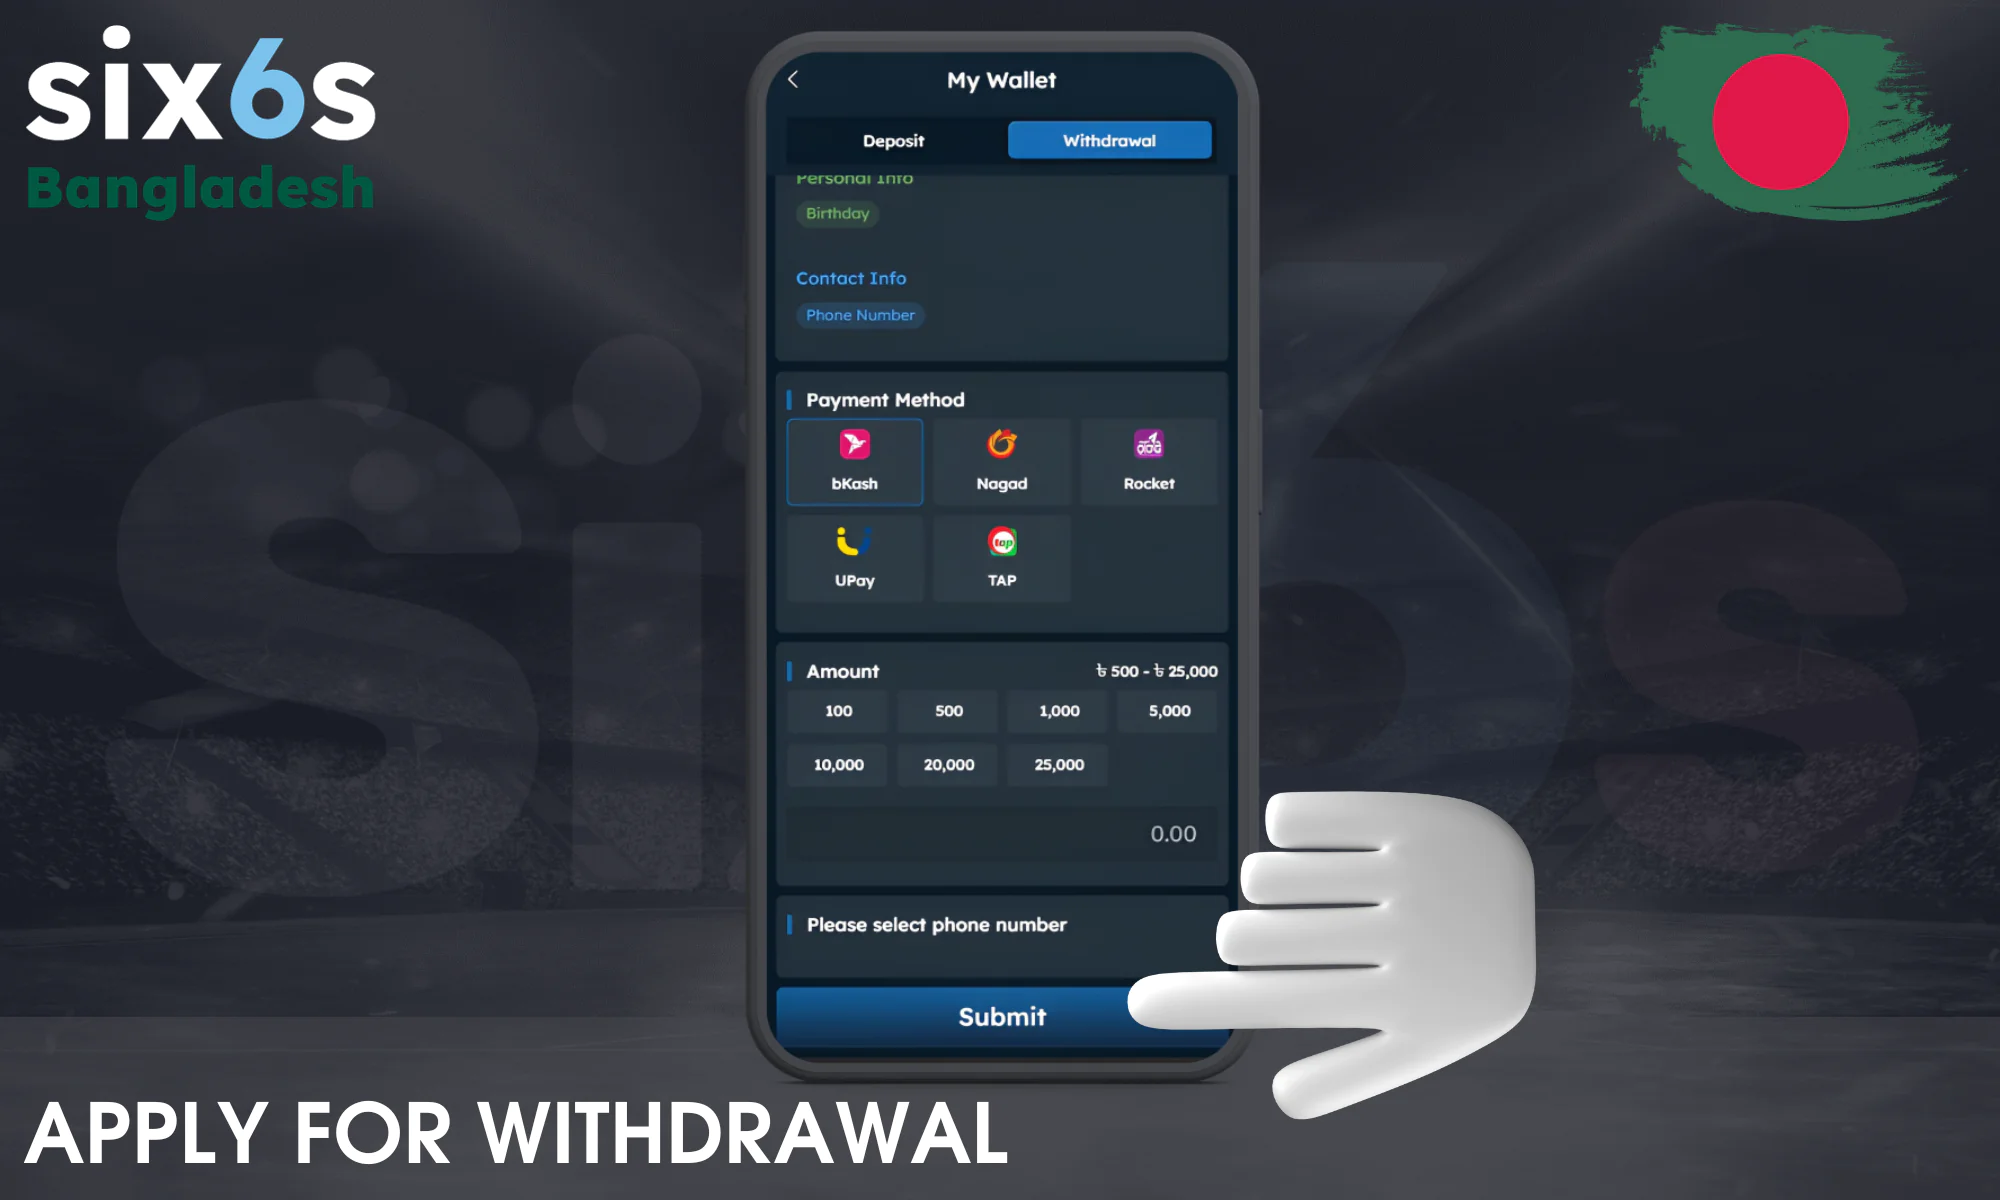 Confirm the withdrawal